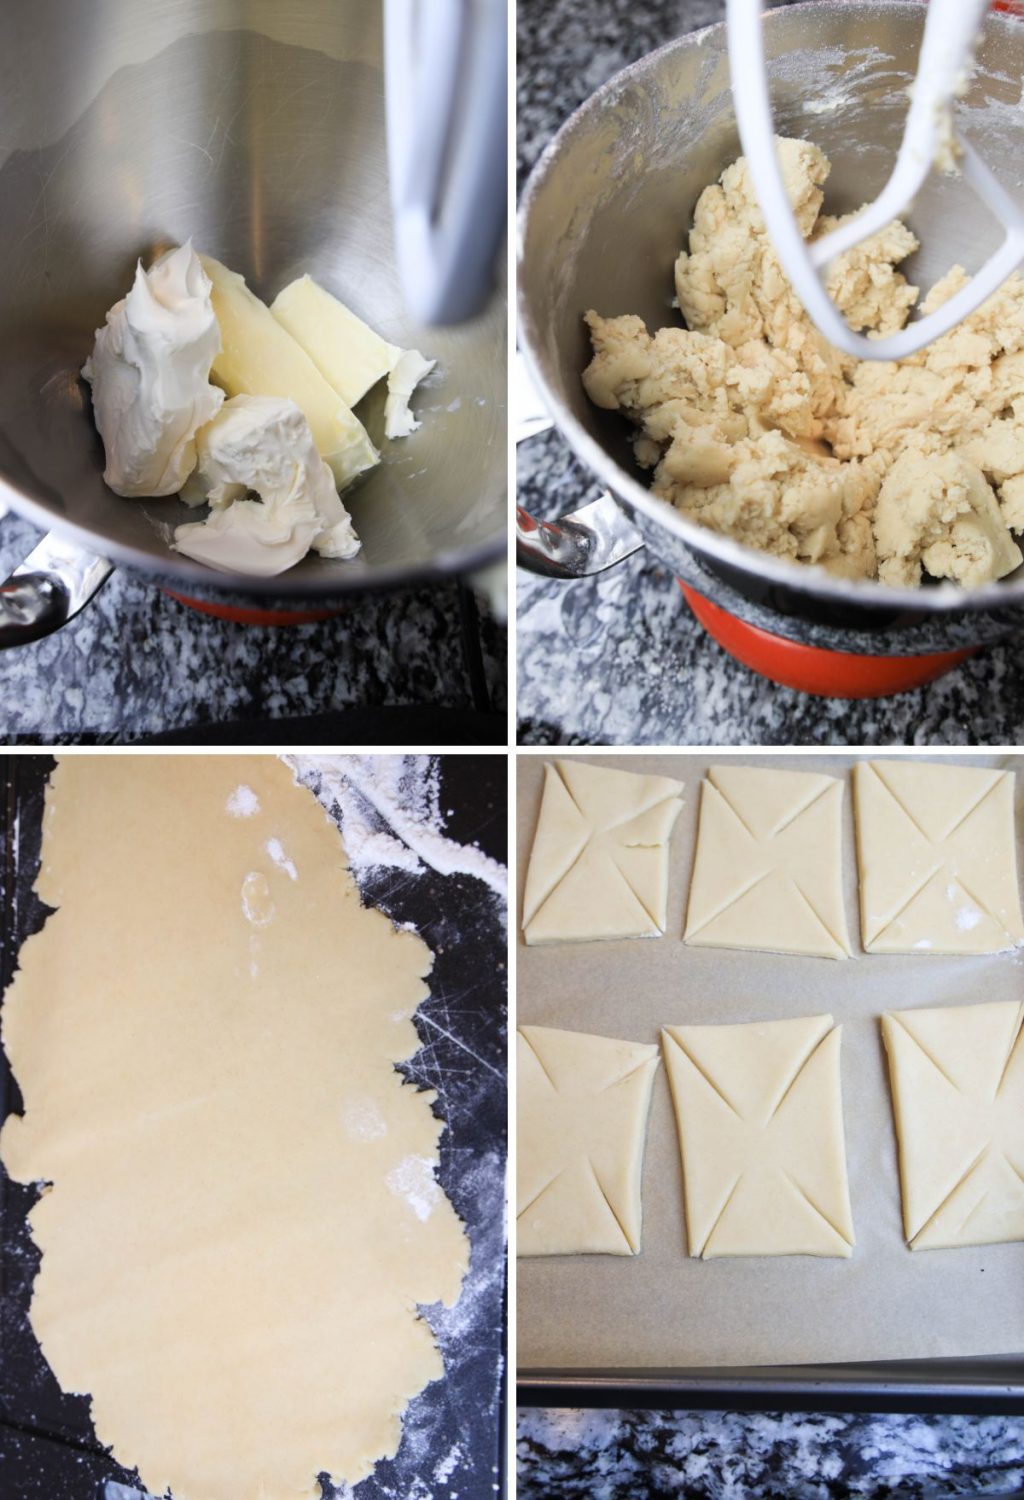 A series of photos showing the process of making cookies.